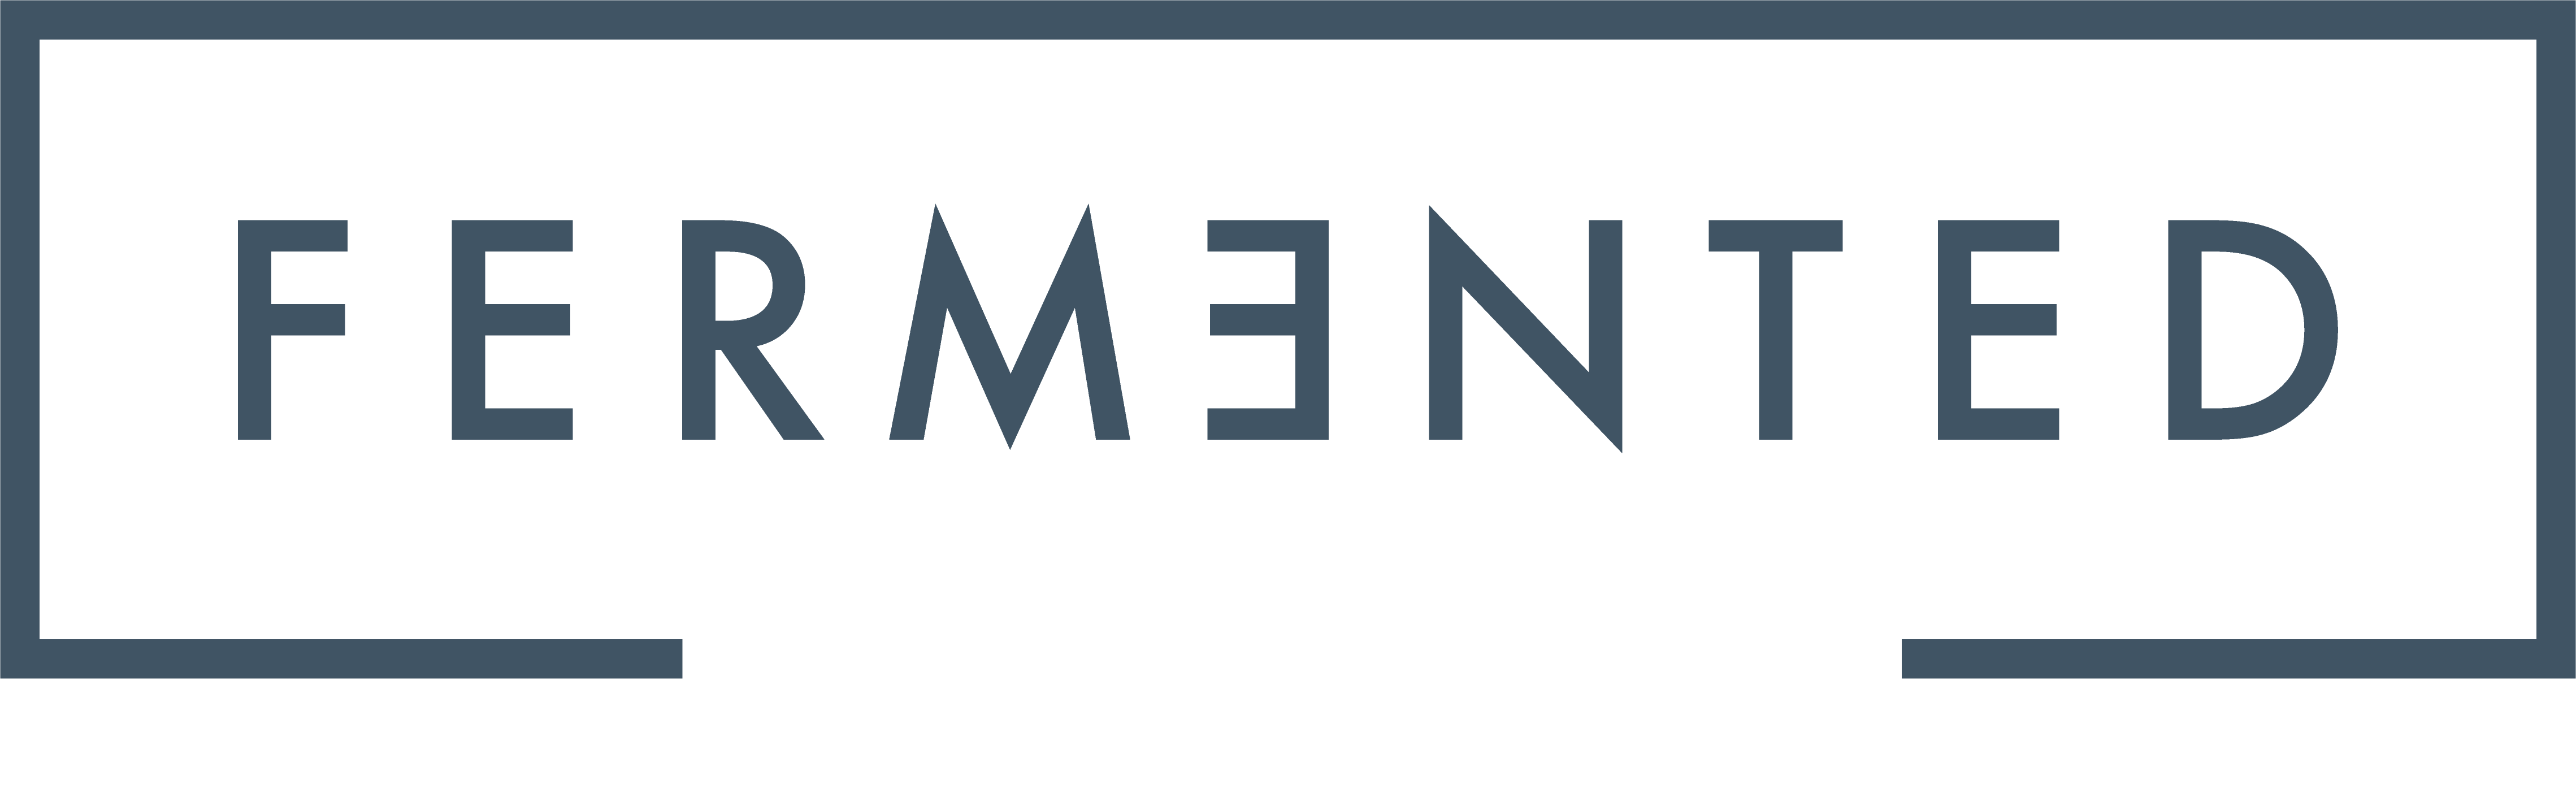 Fermented Grapes